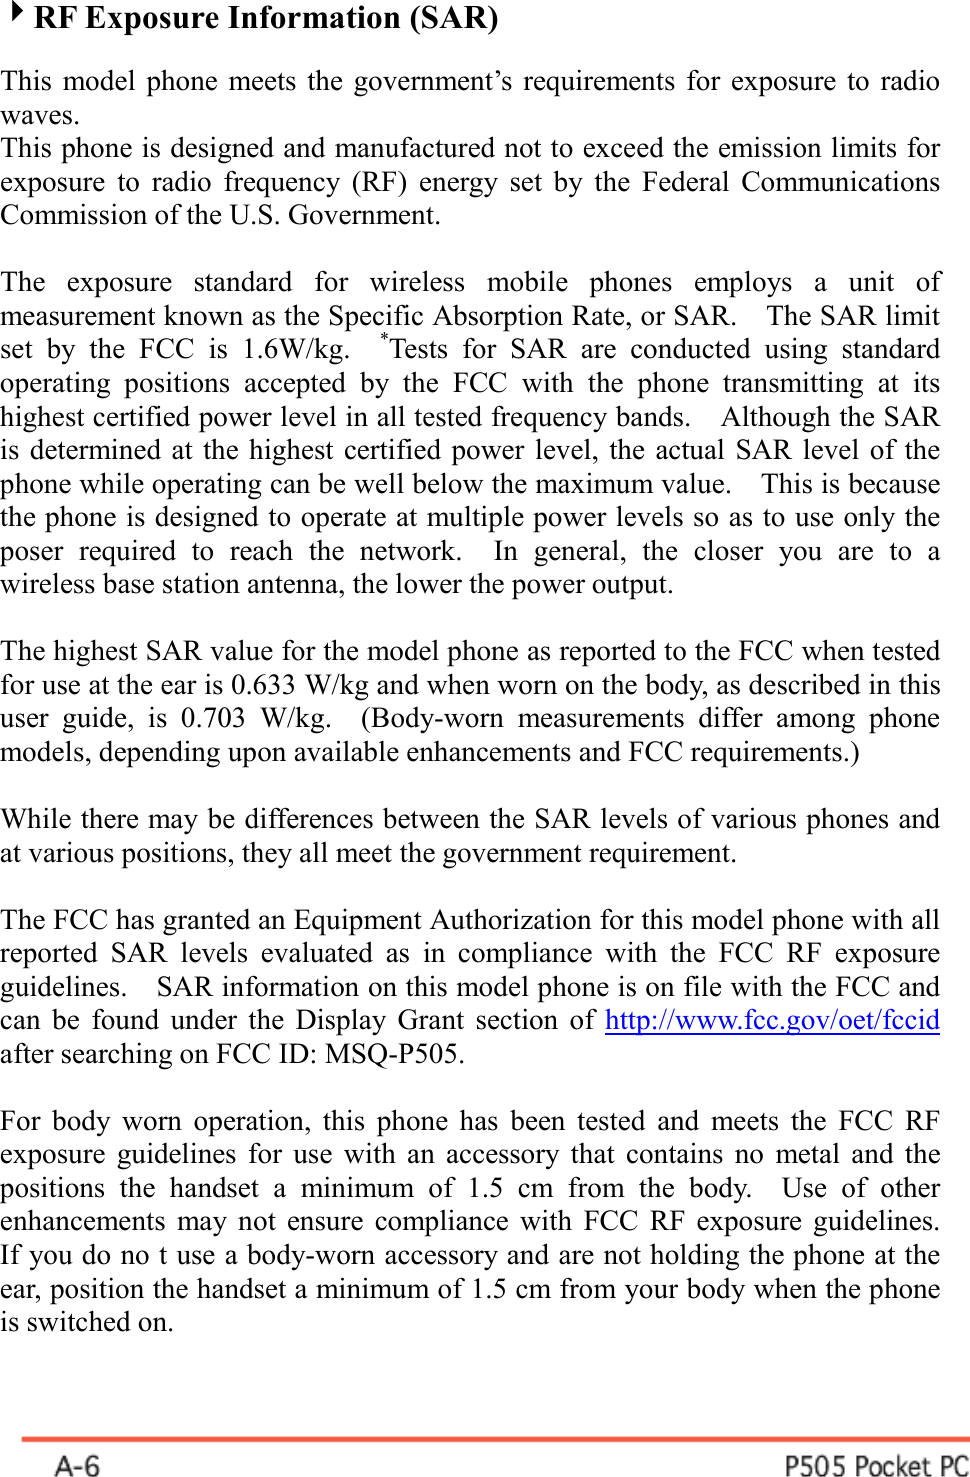  4RF Exposure Information (SAR)  This model phone meets the government’s requirements for exposure to radio waves. This phone is designed and manufactured not to exceed the emission limits for exposure to radio frequency (RF) energy set by the Federal Communications Commission of the U.S. Government.      The exposure standard for wireless mobile phones employs a unit of measurement known as the Specific Absorption Rate, or SAR.    The SAR limit set by the FCC is 1.6W/kg.  *Tests for SAR are conducted using standard operating positions accepted by the FCC with the phone transmitting at its highest certified power level in all tested frequency bands.    Although the SAR is determined at the highest certified power level, the actual SAR level of the phone while operating can be well below the maximum value.    This is because the phone is designed to operate at multiple power levels so as to use only the poser required to reach the network.  In general, the closer you are to a wireless base station antenna, the lower the power output.  The highest SAR value for the model phone as reported to the FCC when tested for use at the ear is 0.633 W/kg and when worn on the body, as described in this user guide, is 0.703 W/kg.  (Body-worn measurements differ among phone models, depending upon available enhancements and FCC requirements.)  While there may be differences between the SAR levels of various phones and at various positions, they all meet the government requirement.  The FCC has granted an Equipment Authorization for this model phone with all reported SAR levels evaluated as in compliance with the FCC RF exposure guidelines.    SAR information on this model phone is on file with the FCC and can be found under the Display Grant section of http://www.fcc.gov/oet/fccid after searching on FCC ID: MSQ-P505.  For body worn operation, this phone has been tested and meets the FCC RF exposure guidelines for use with an accessory that contains no metal and the positions the handset a minimum of 1.5 cm from the body.  Use of other enhancements may not ensure compliance with FCC RF exposure guidelines.   If you do no t use a body-worn accessory and are not holding the phone at the ear, position the handset a minimum of 1.5 cm from your body when the phone is switched on.  